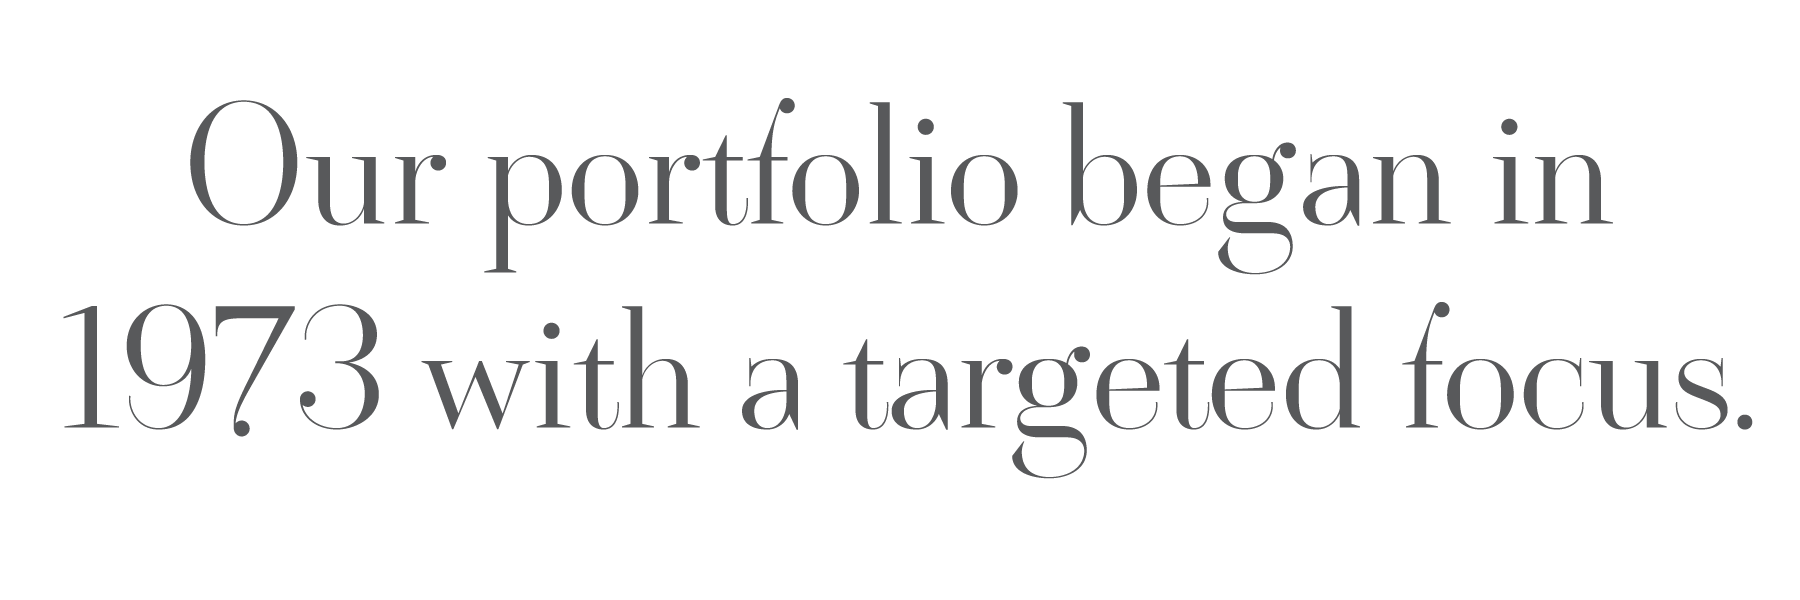 Our portfolio began in 1973 with a targeted focus.